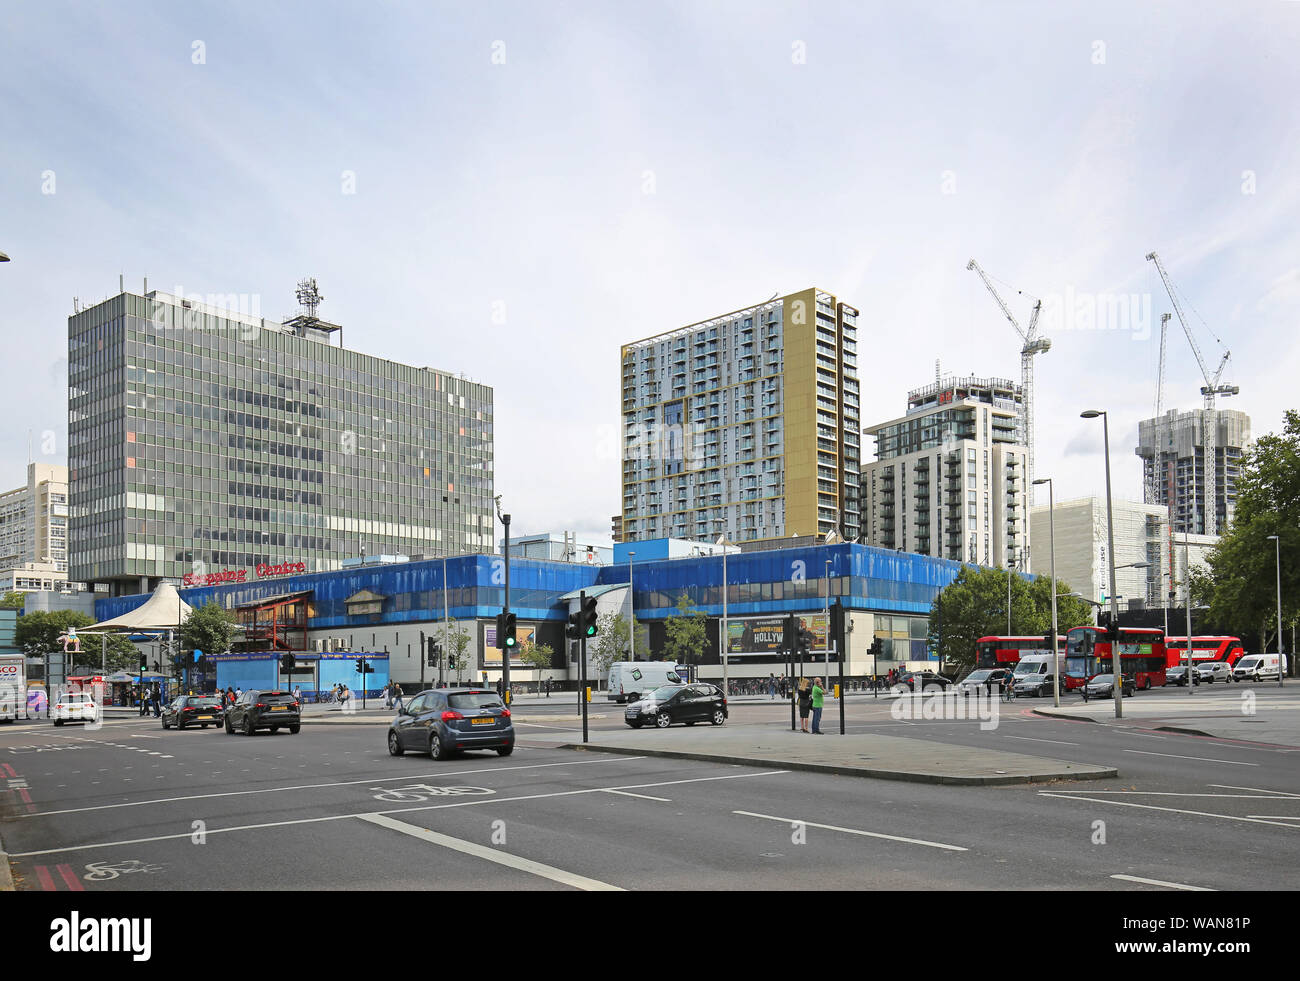 The delapidated shopping centre at Elephant and Castle in southeast London, UK. New residential development 'Elephant Park' in background (right). Stock Photo